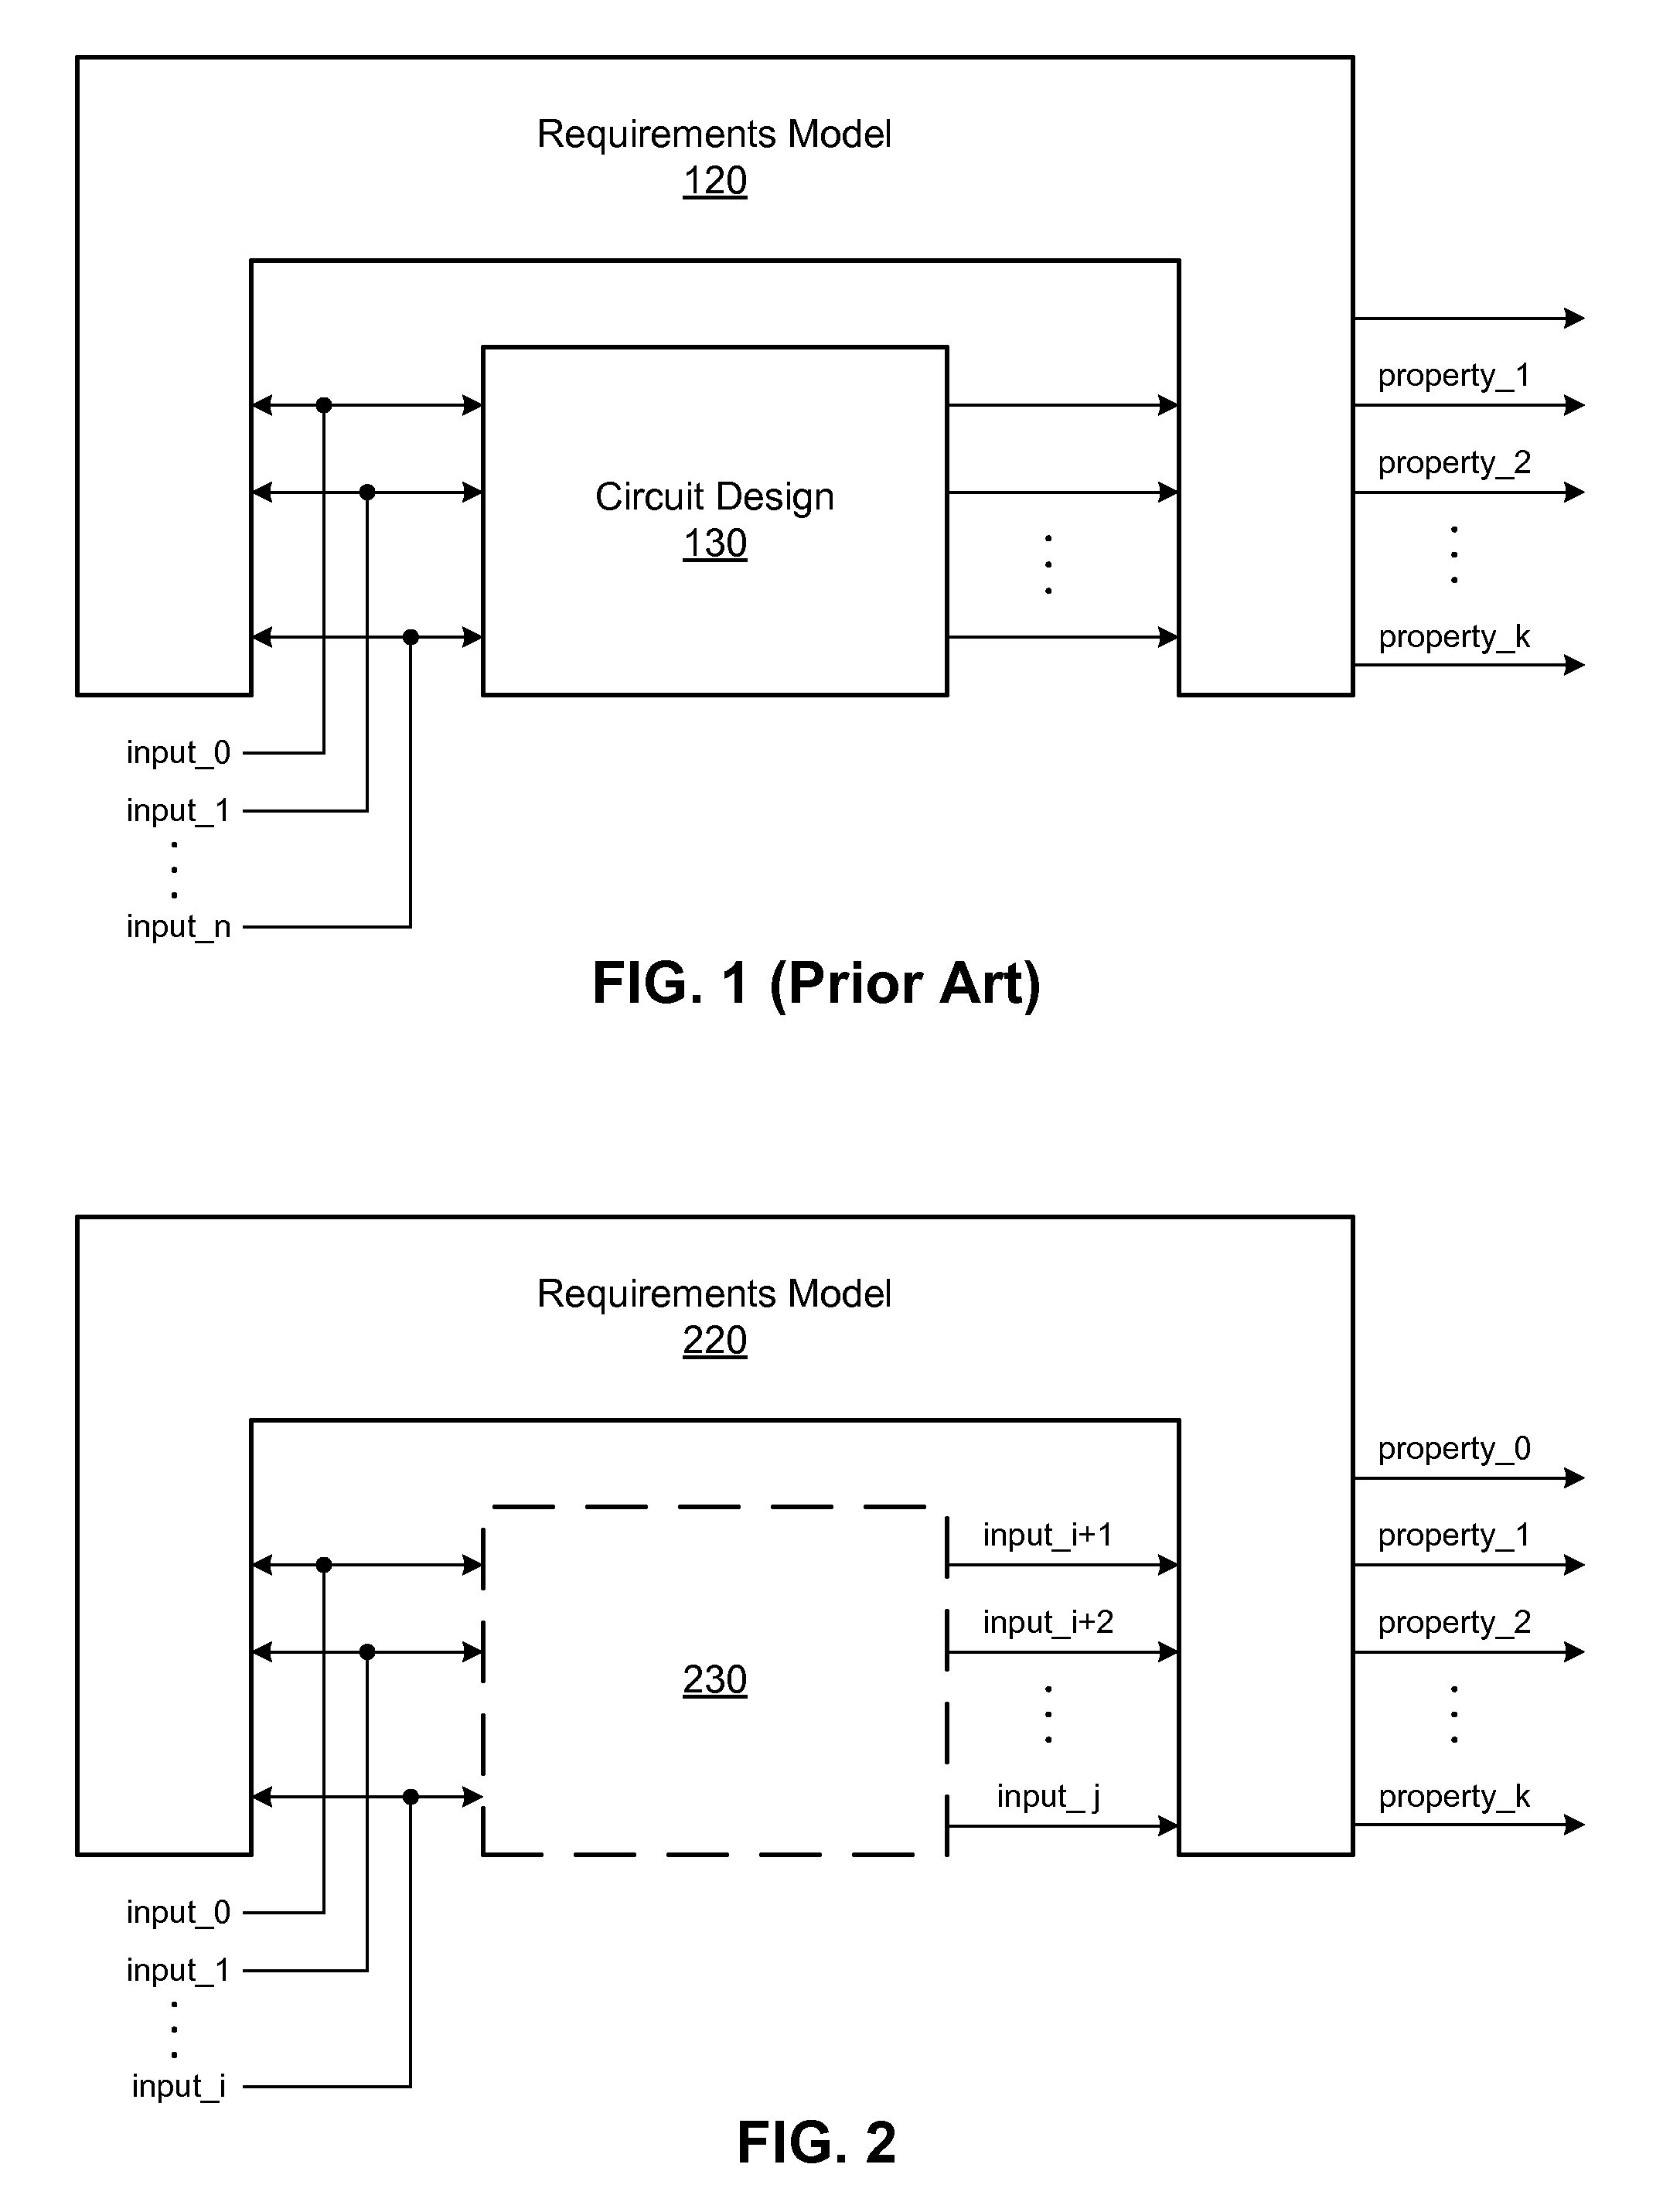 Meaningful visualization of properties independent of a circuit design